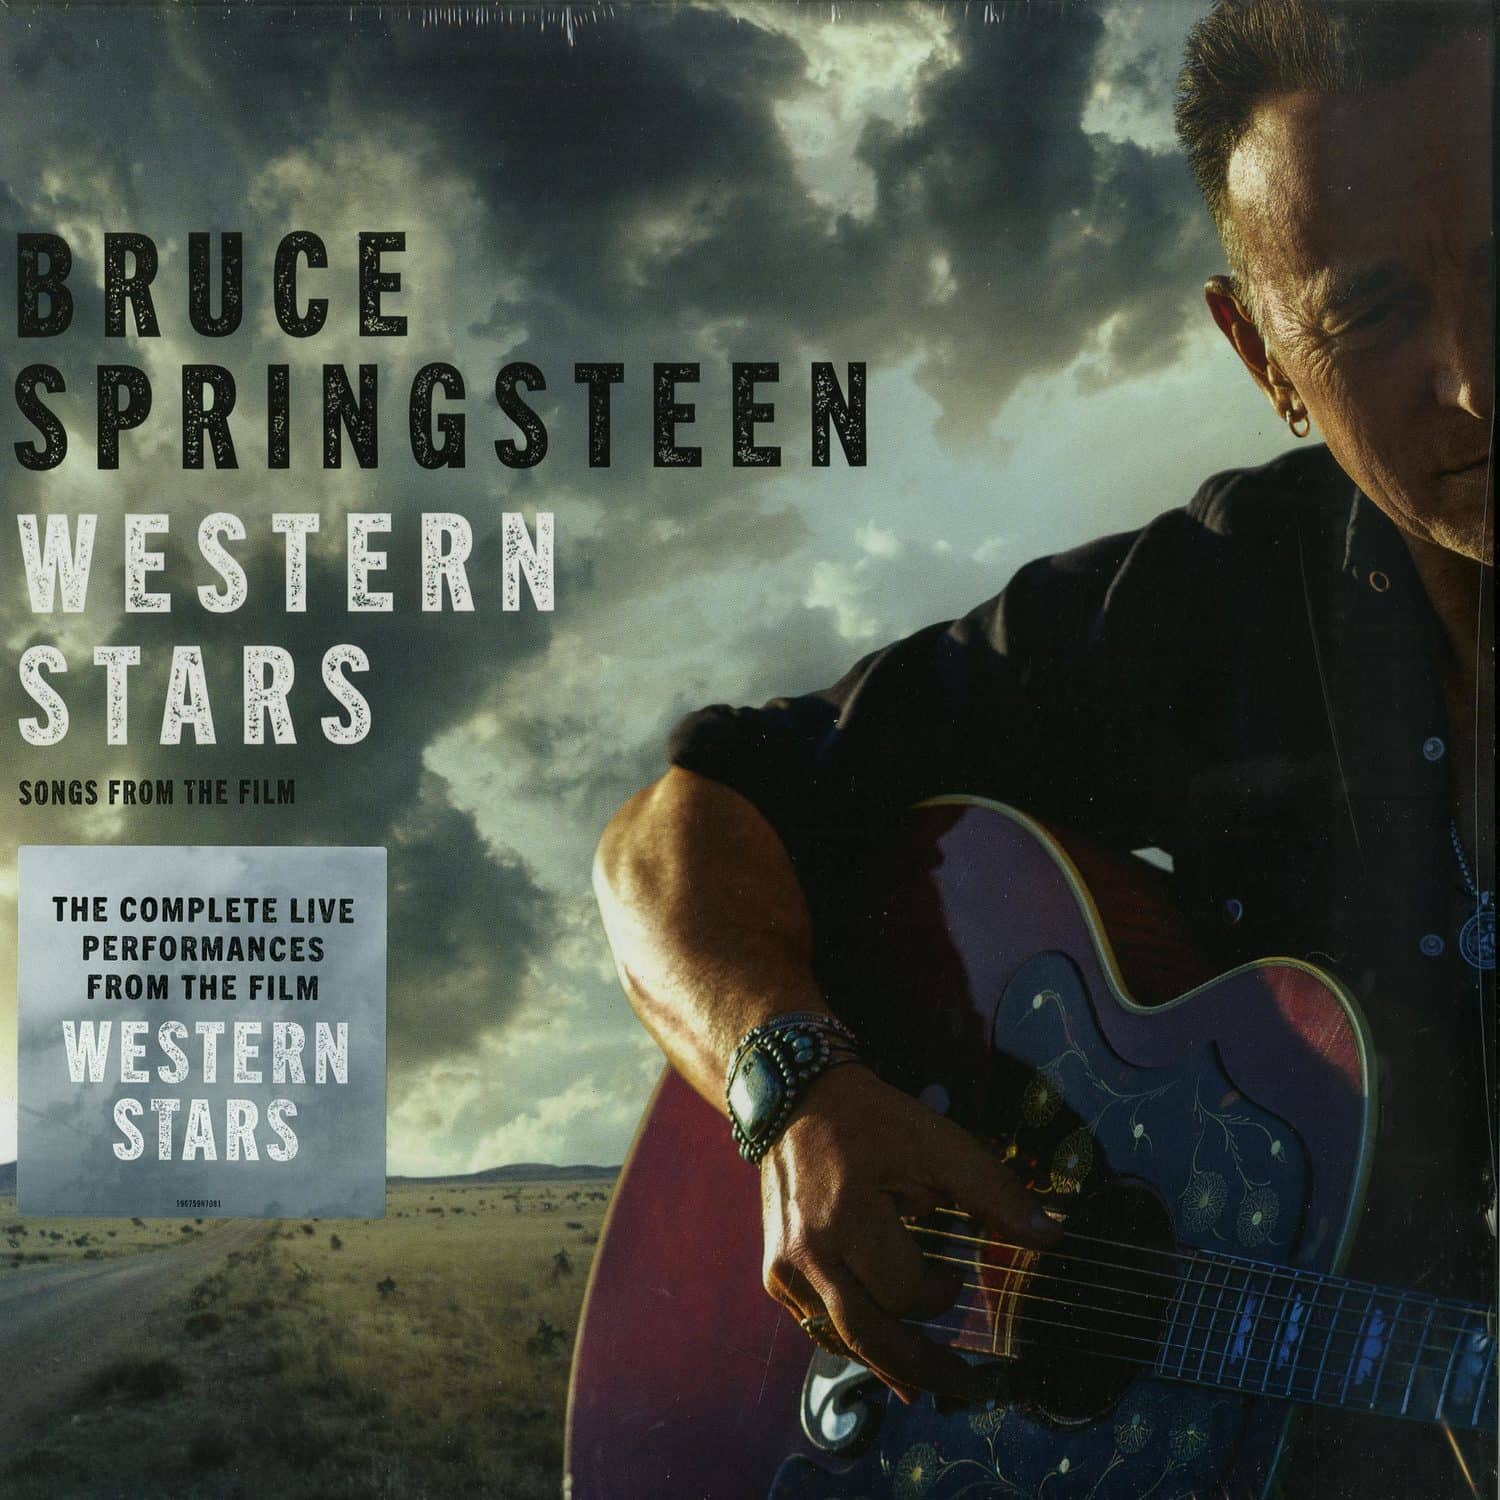 Bruce Springsteen - WESTERN STARS - SONGS FROM THE FILM 